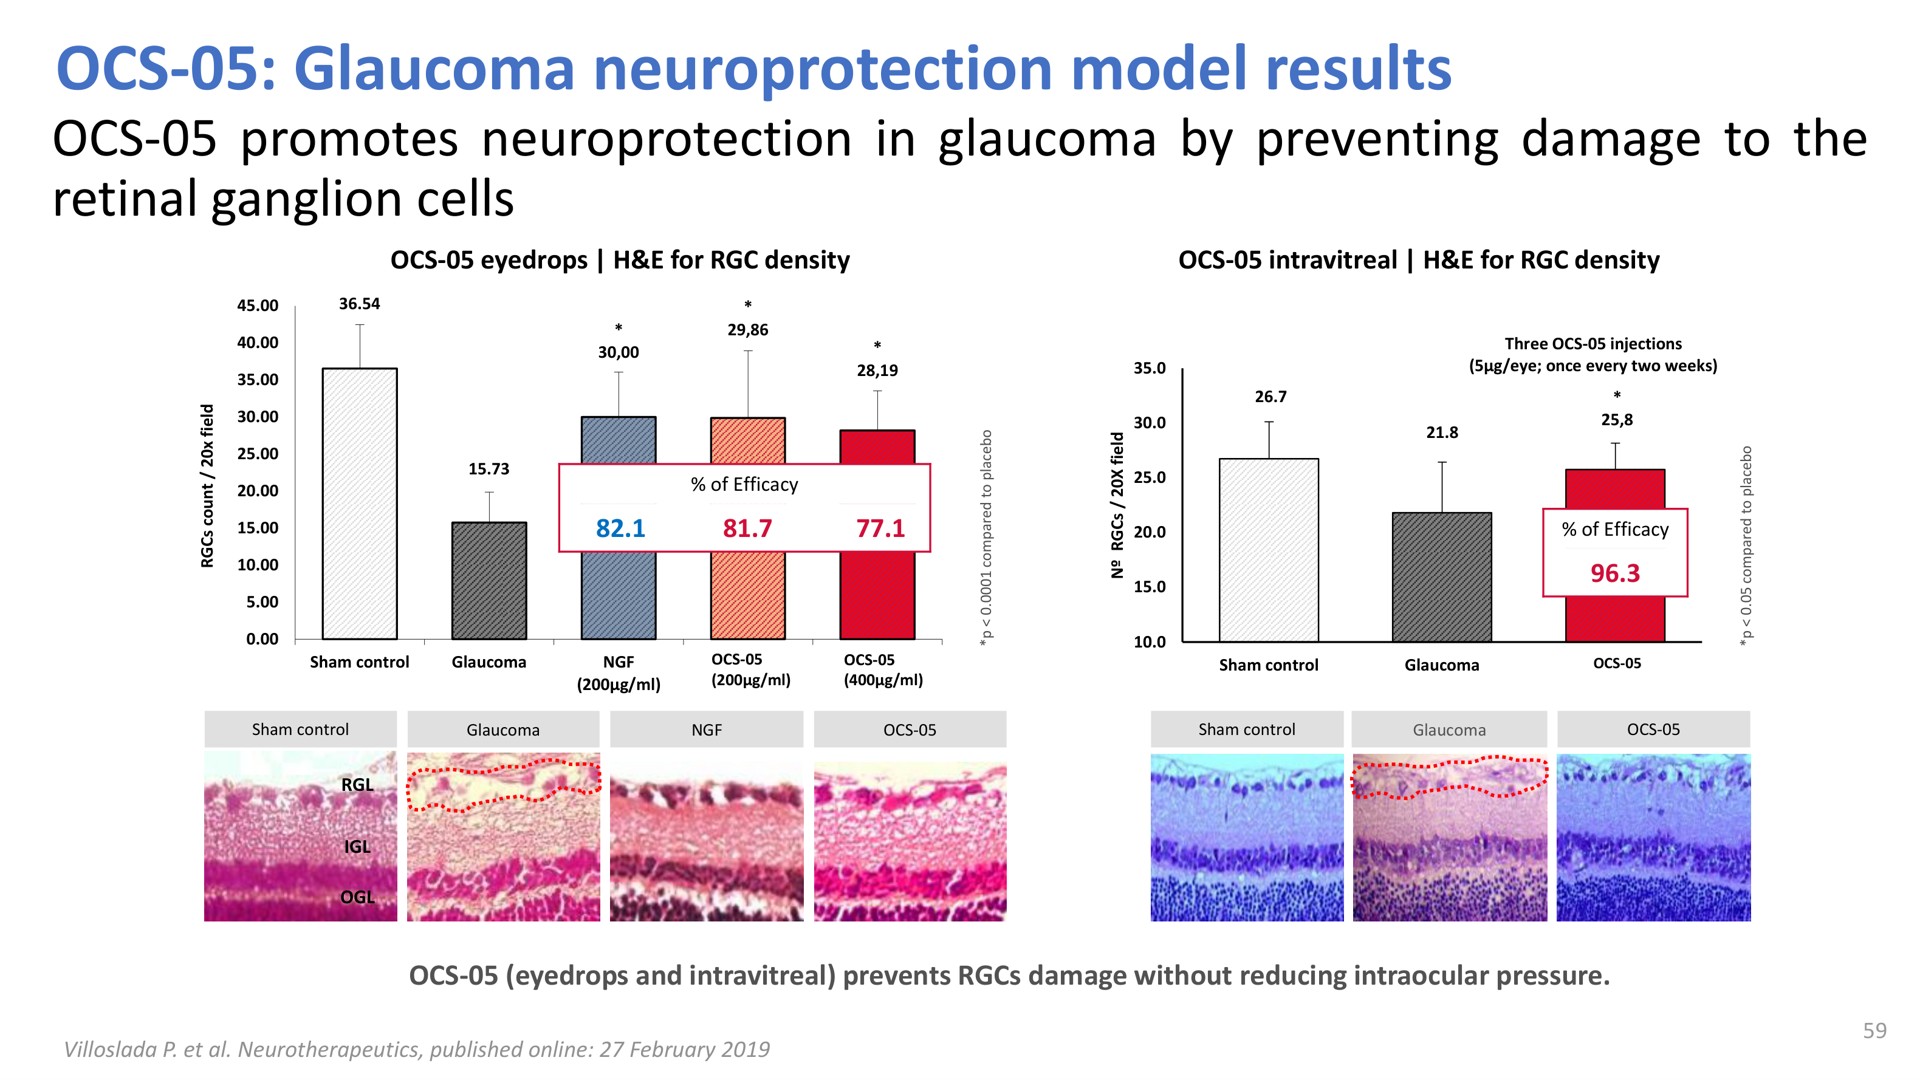 glaucoma model results promotes in glaucoma by preventing damage to the retinal ganglion cells | Oculis